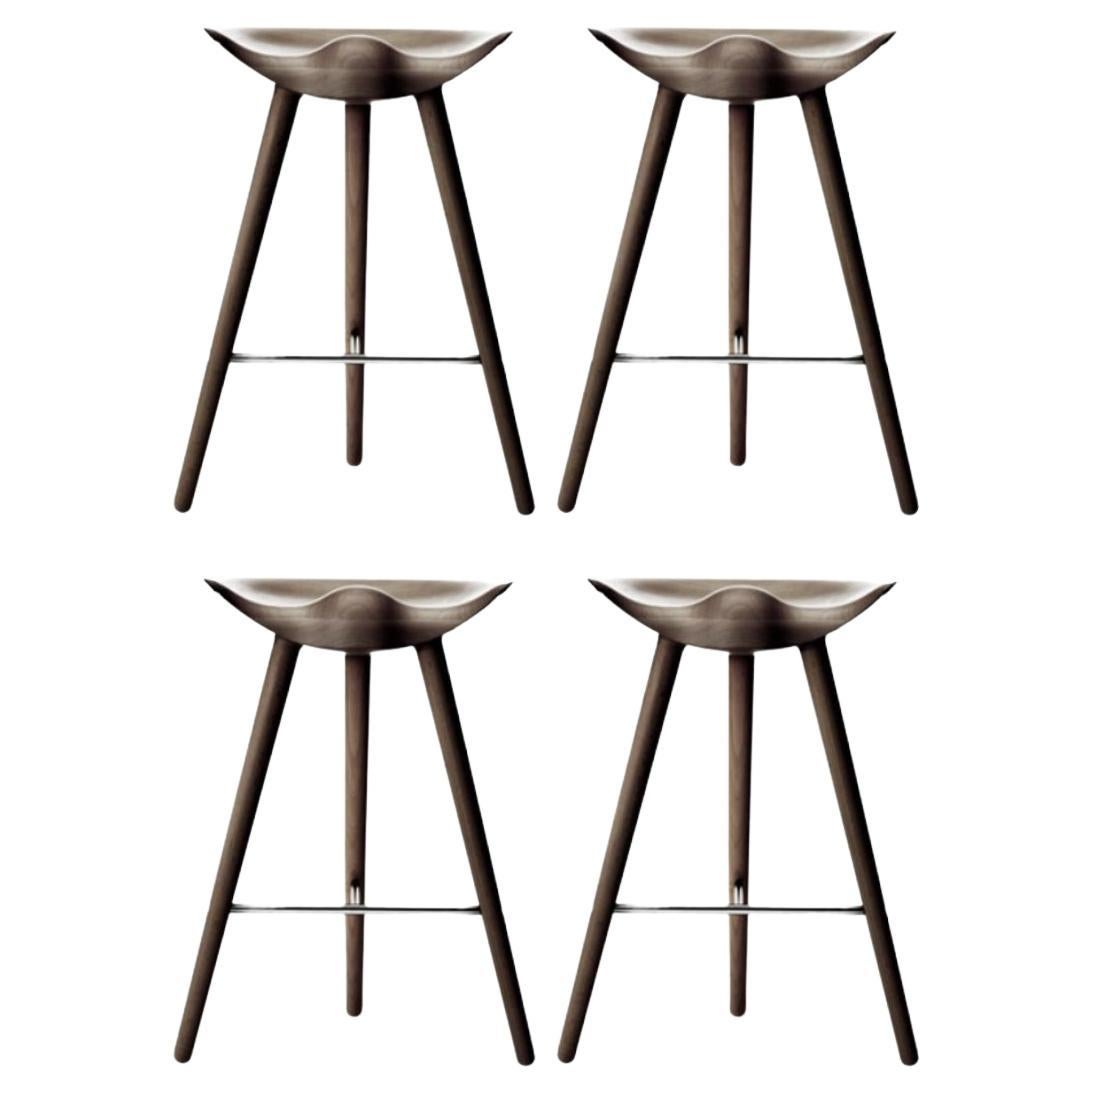 4er set ML 42 Brown Oak and Stainless Steel Counter Stools by Lassen im Angebot